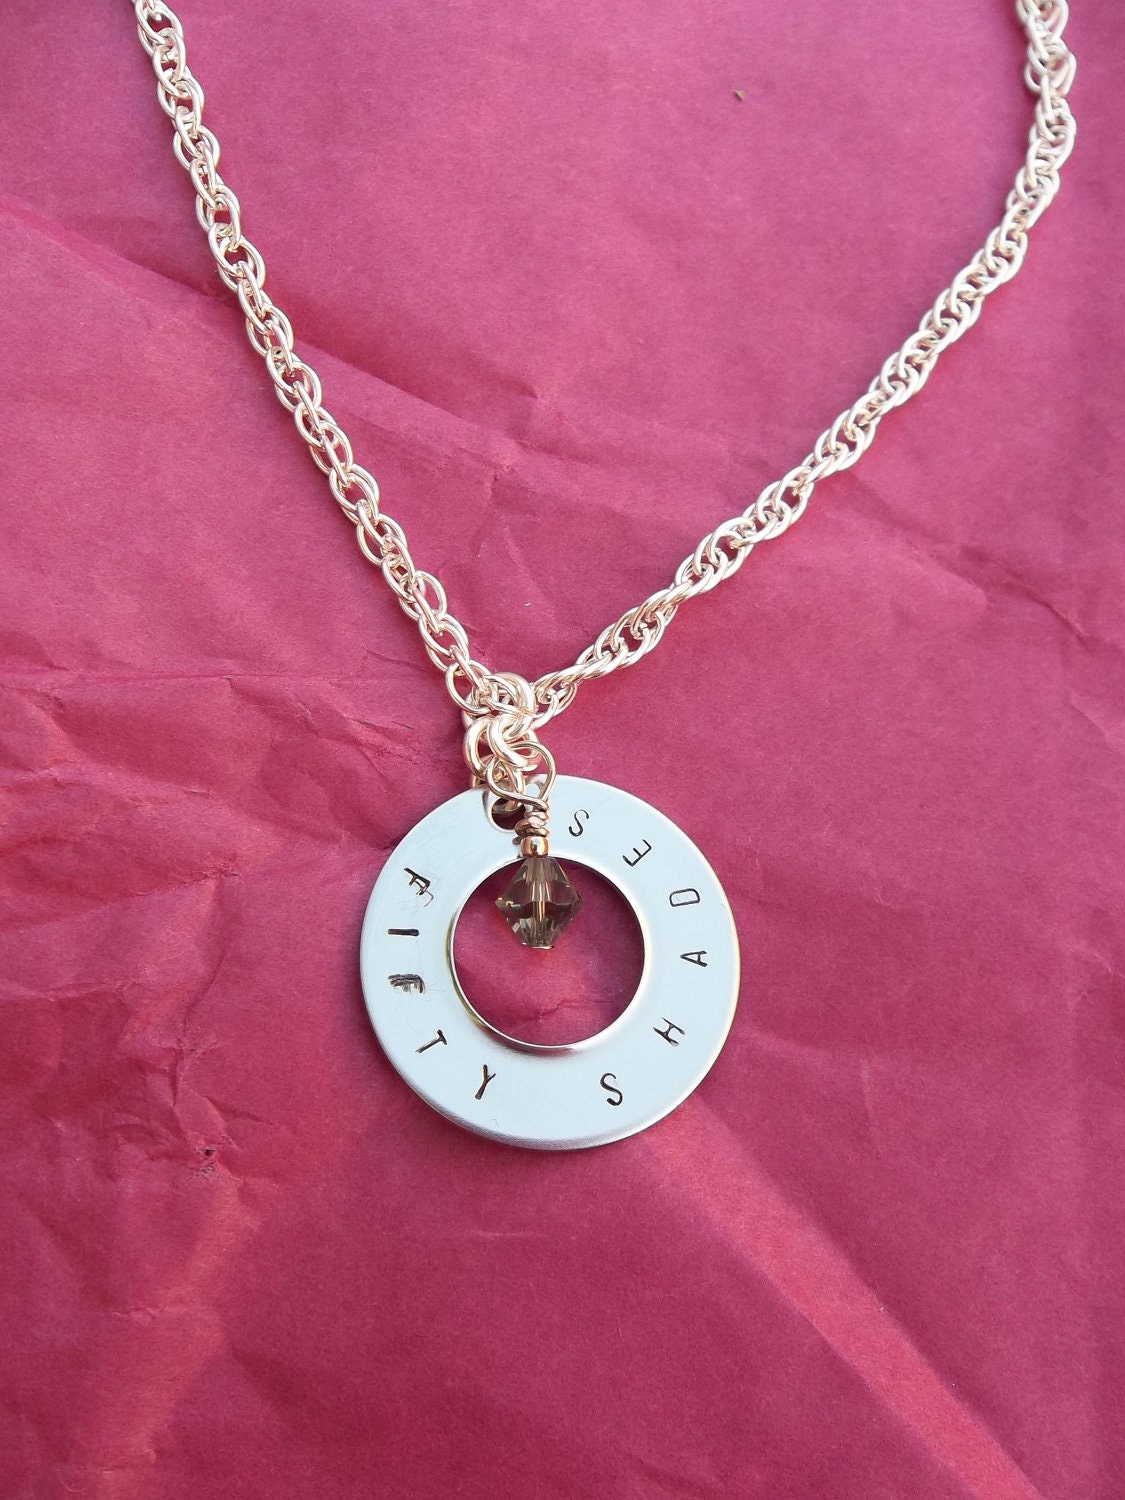 Fifty Shades of Grey Hand-Stamped Necklace Inspired by the Book